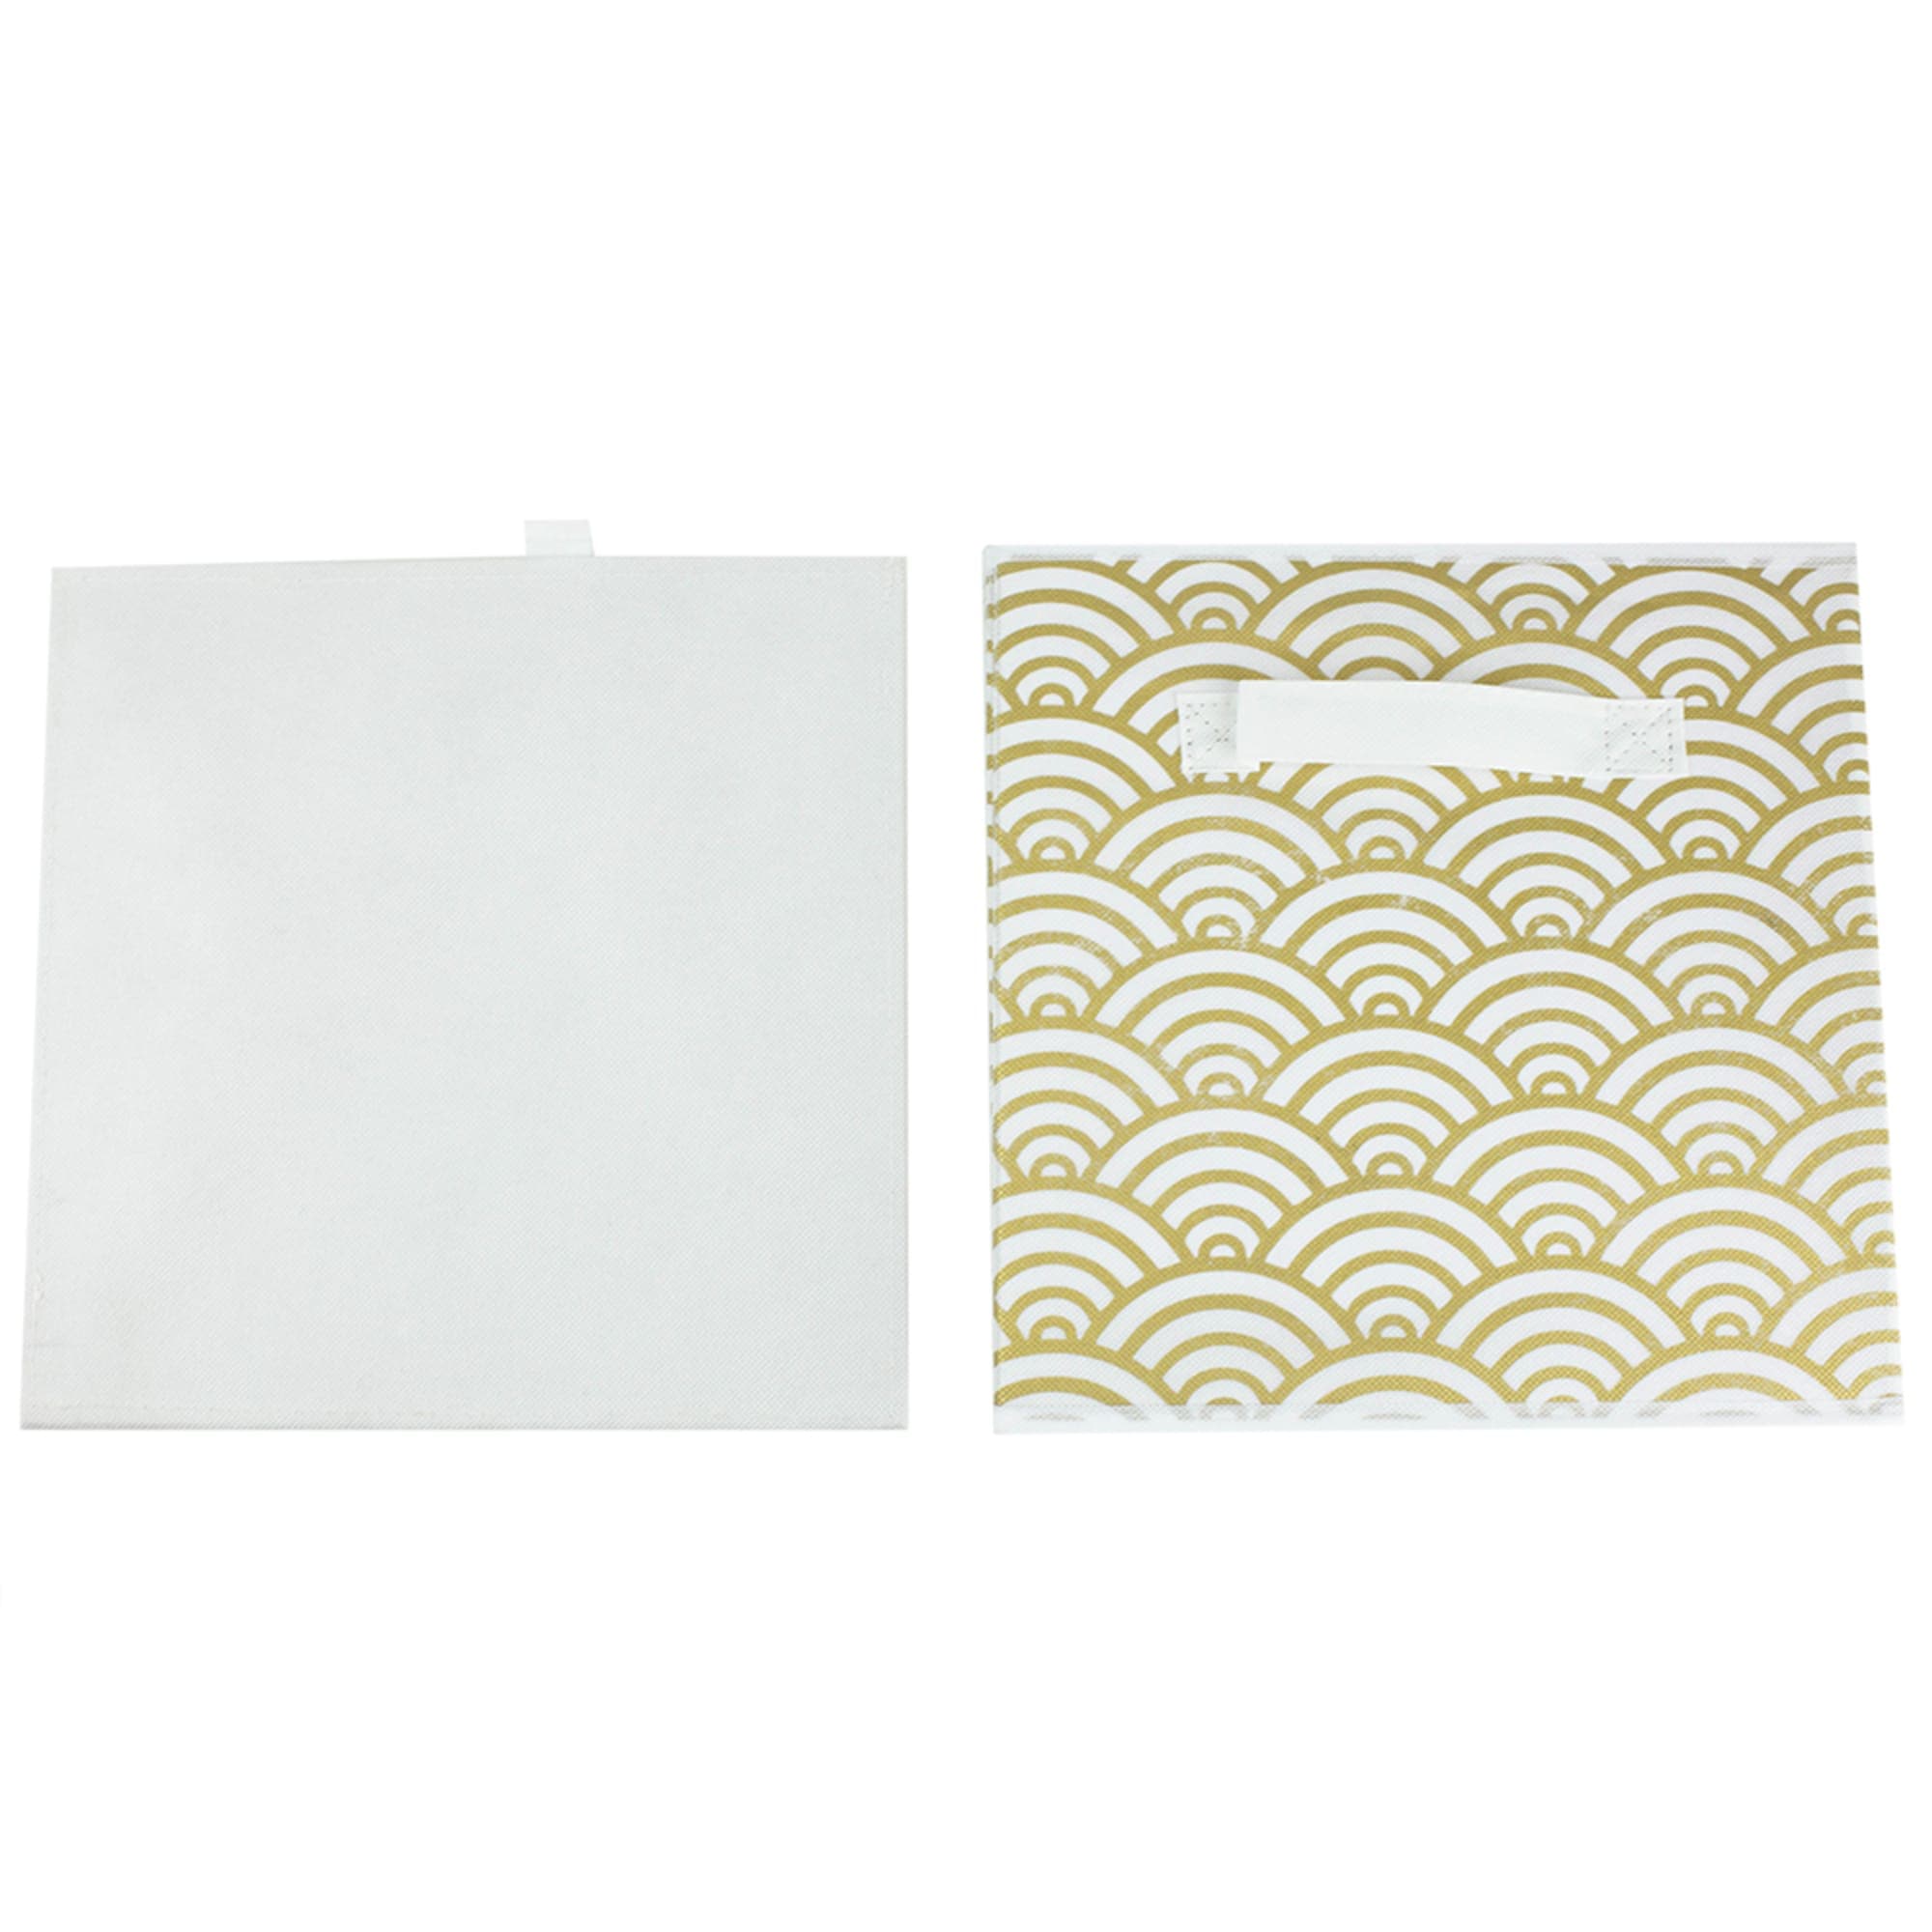 Home Basics Metallic Scallop Collapsible Non-Woven Storage Cube, Gold $3.00 EACH, CASE PACK OF 12